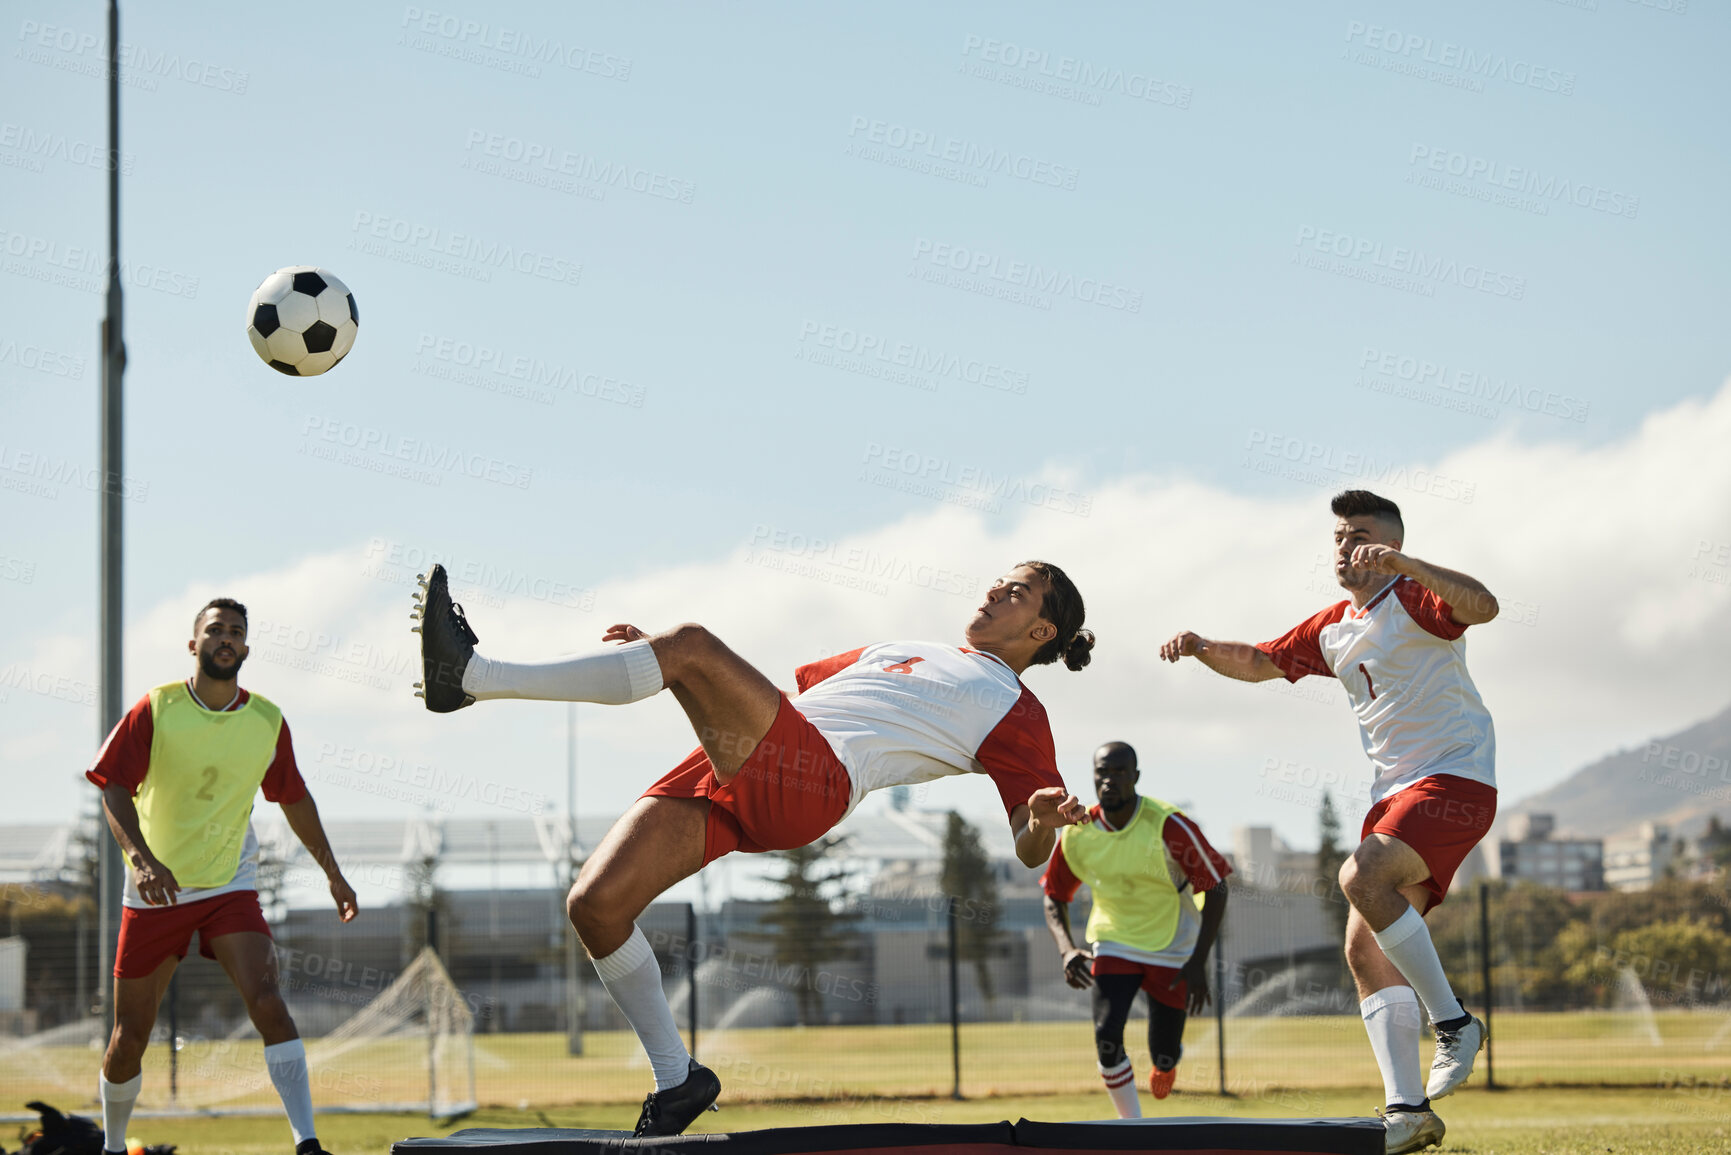 Buy stock photo Sports, soccer and soccer player with team and soccer ball in power kick while playing on soccer field. Energy, fitness and football with football players competing in training, exercise and practice